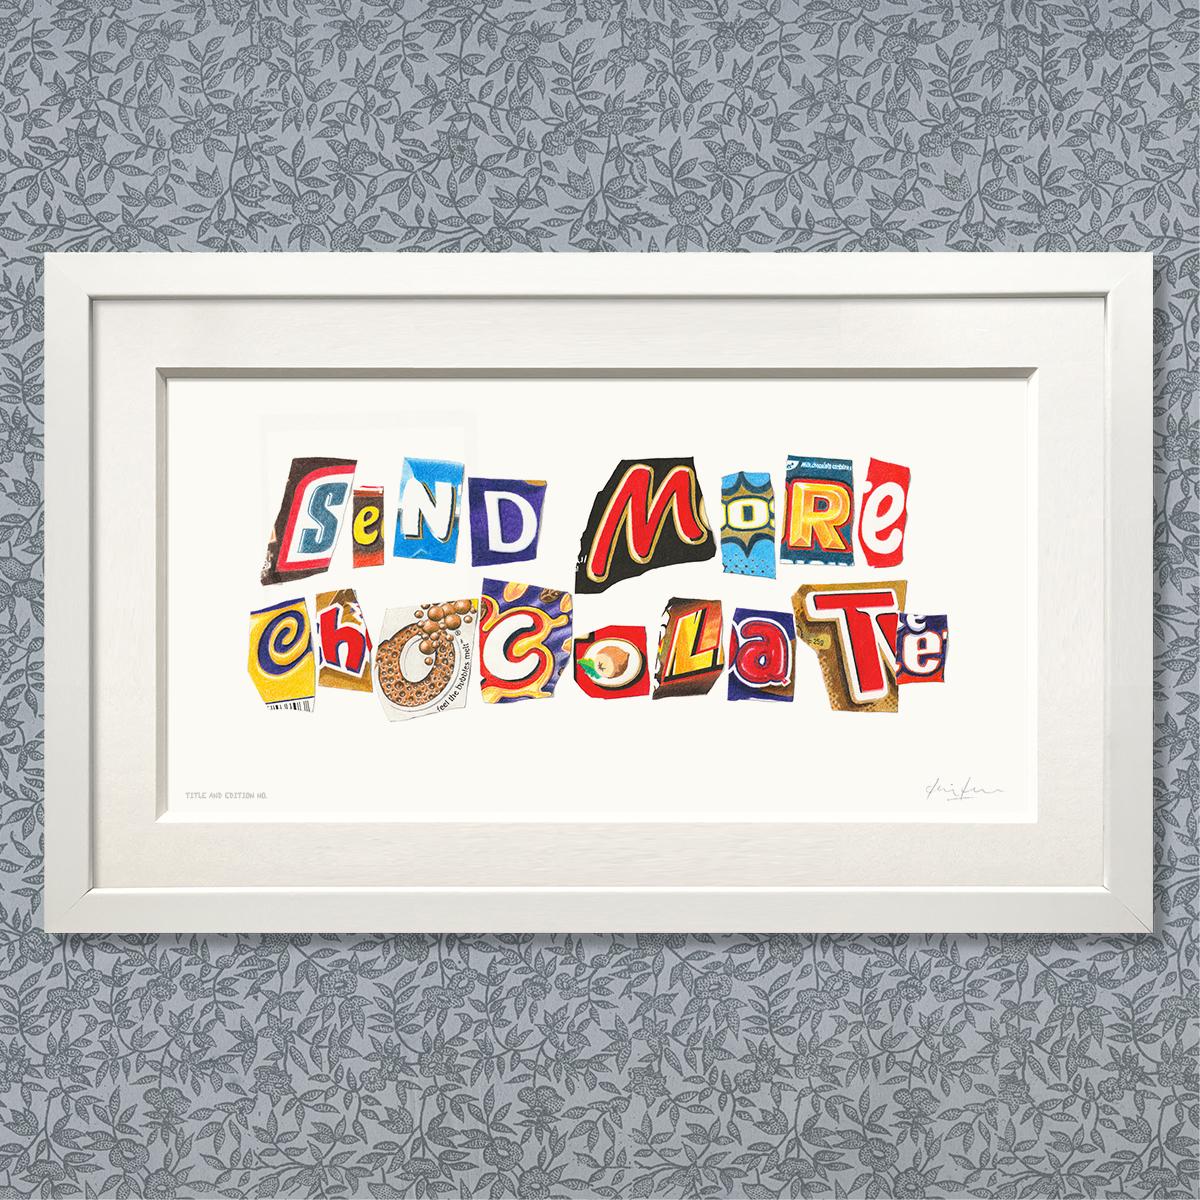 Limited edition print (large version) of drawing of cut-out letters - Send More Chocolate - in a white frame.